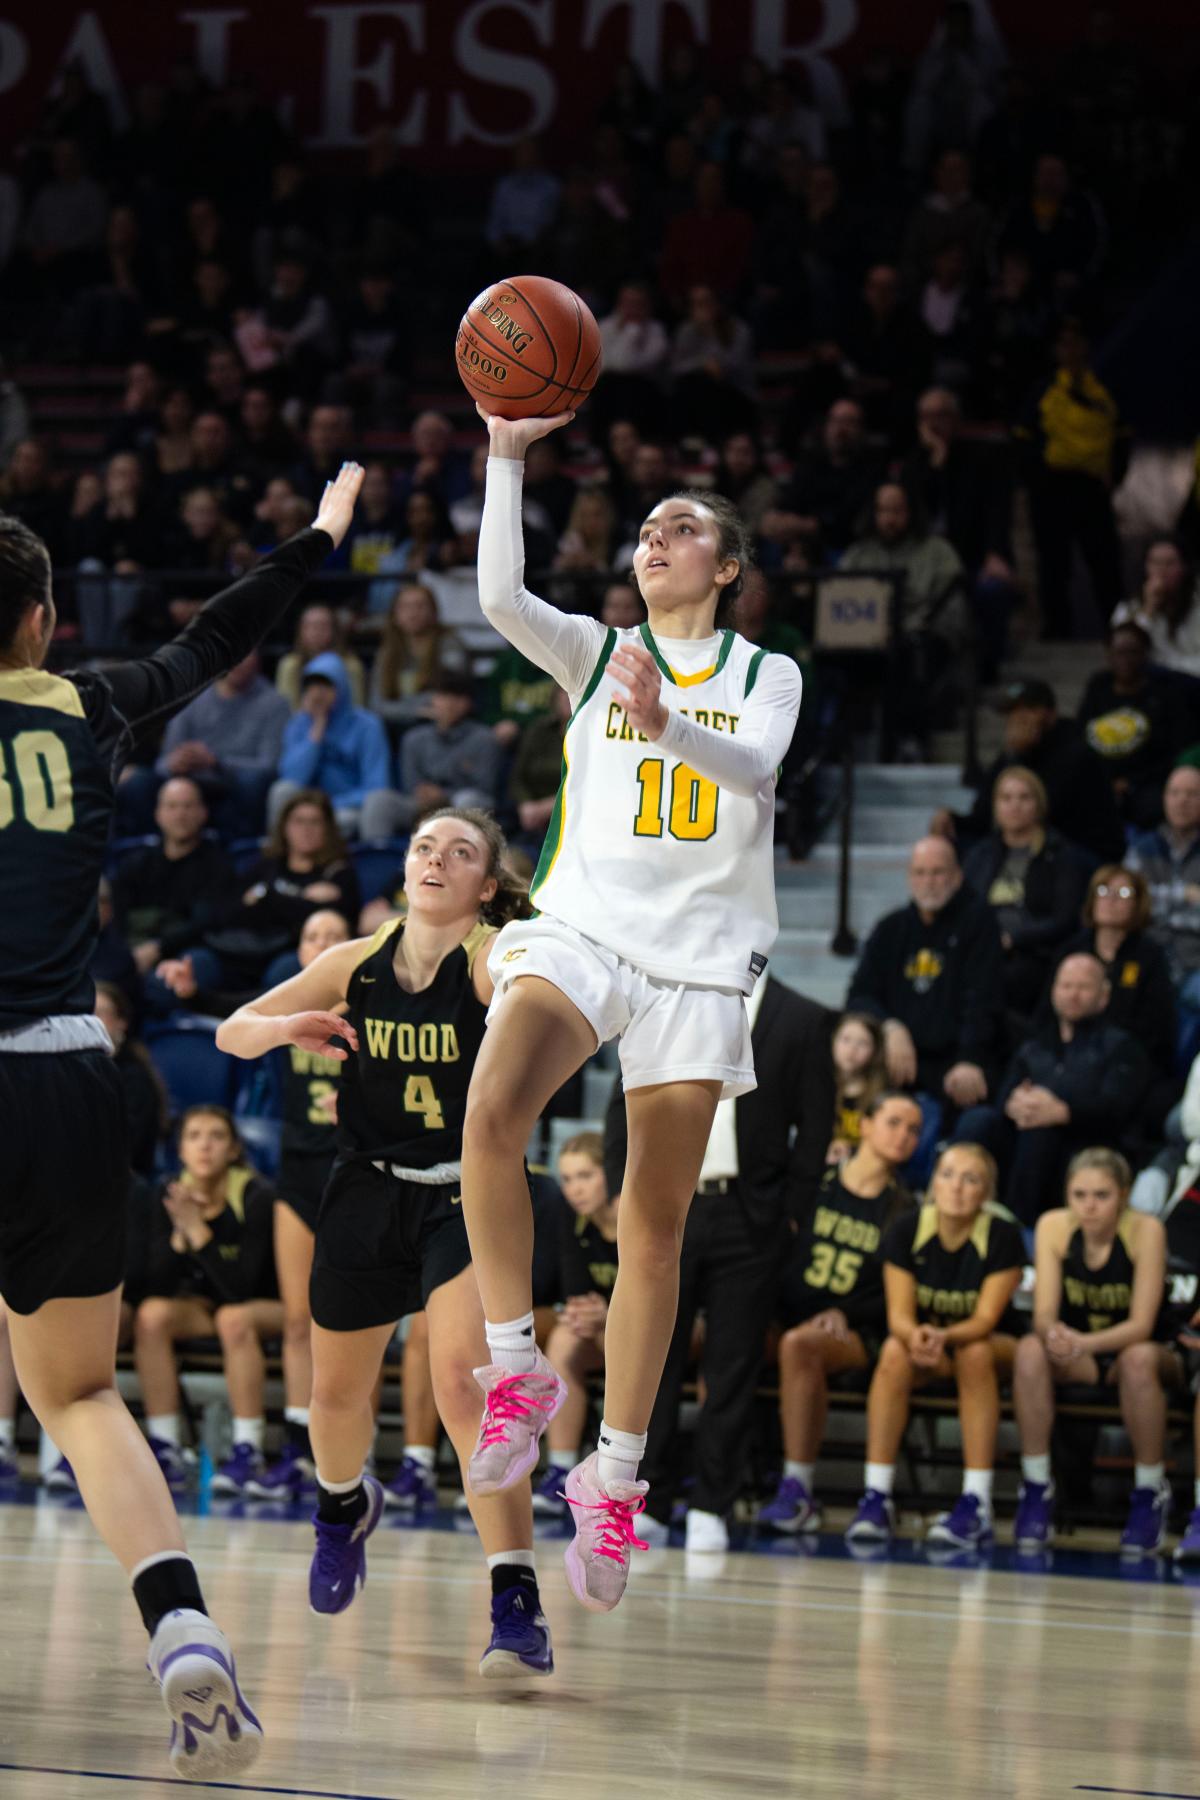 PCL Championship Olivia Boccella gives Lansdale Catholic win over Wood